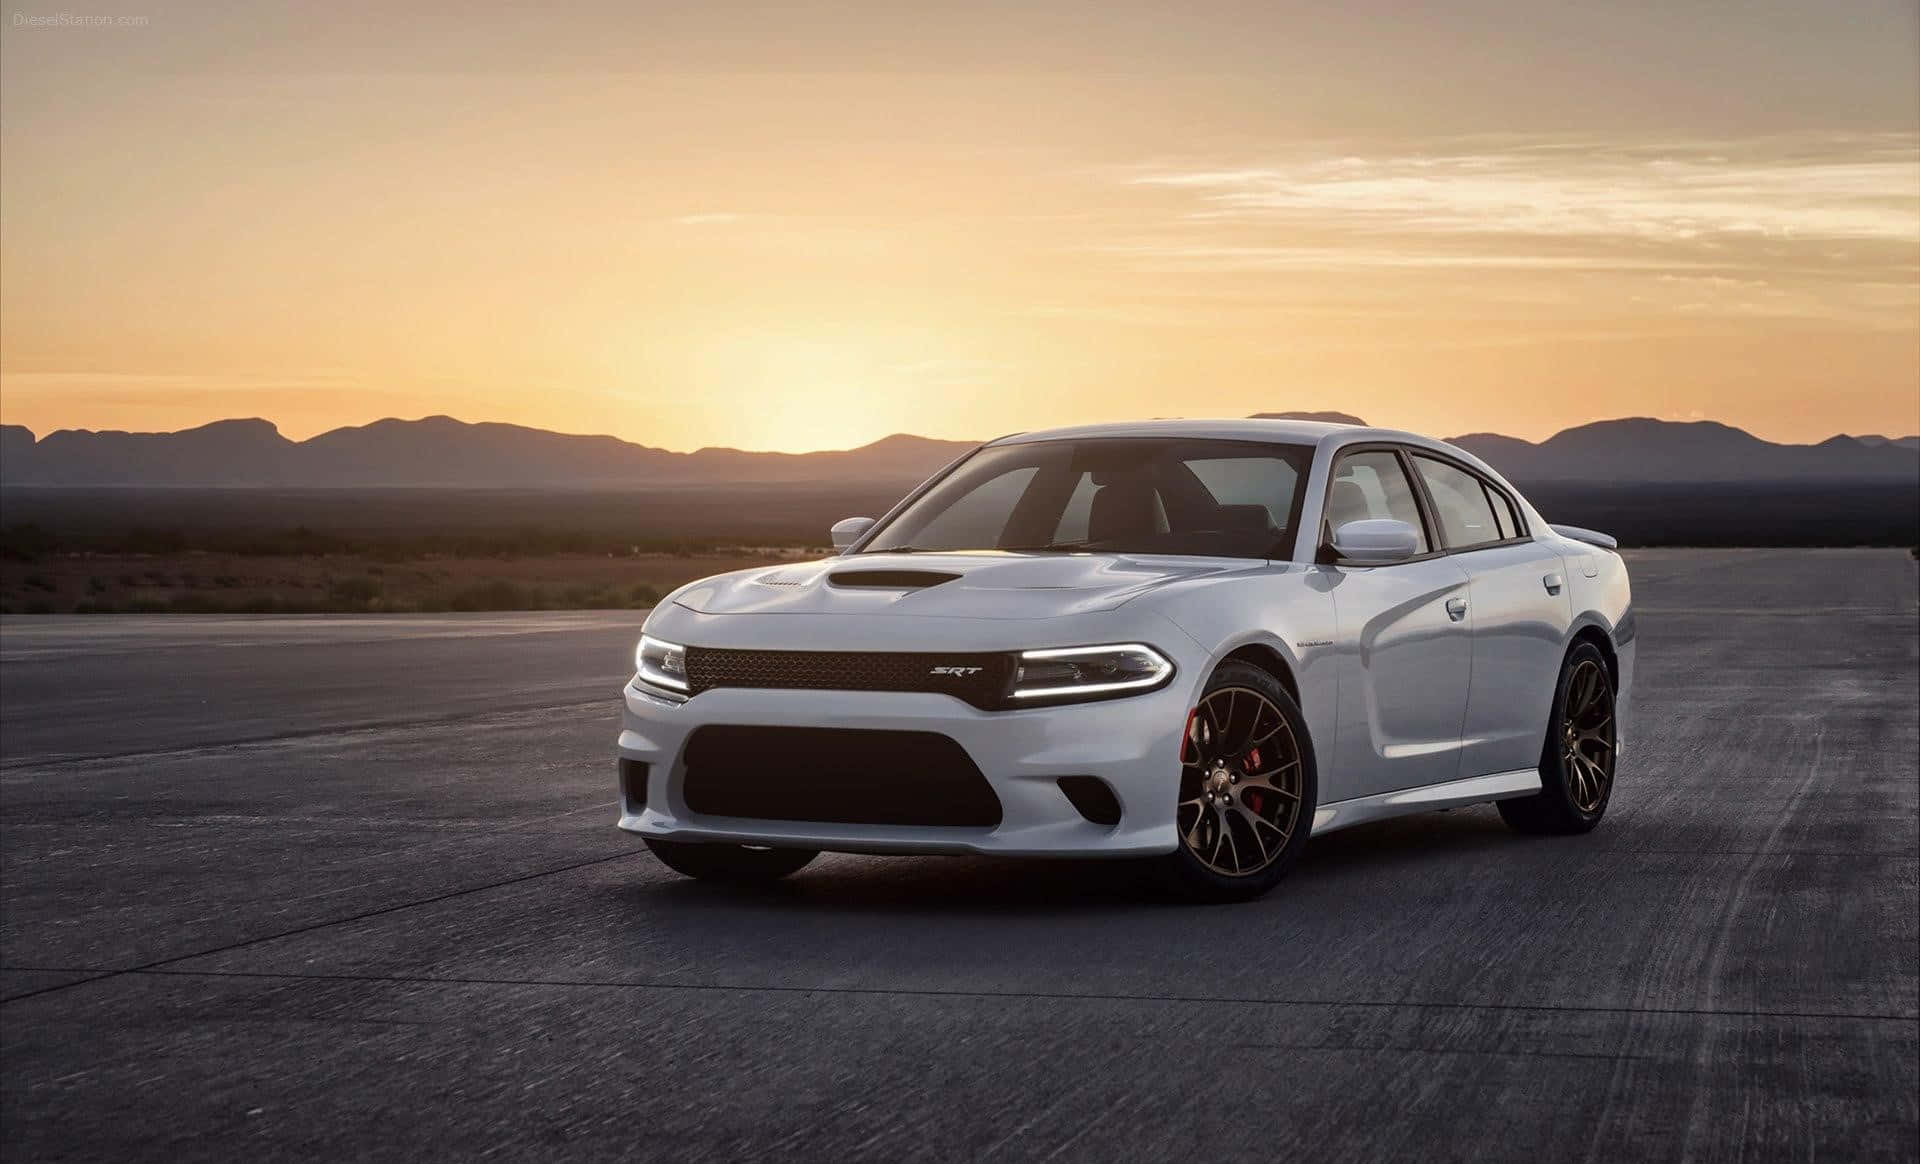 White Dodge Charger S R T Sunset Wallpaper